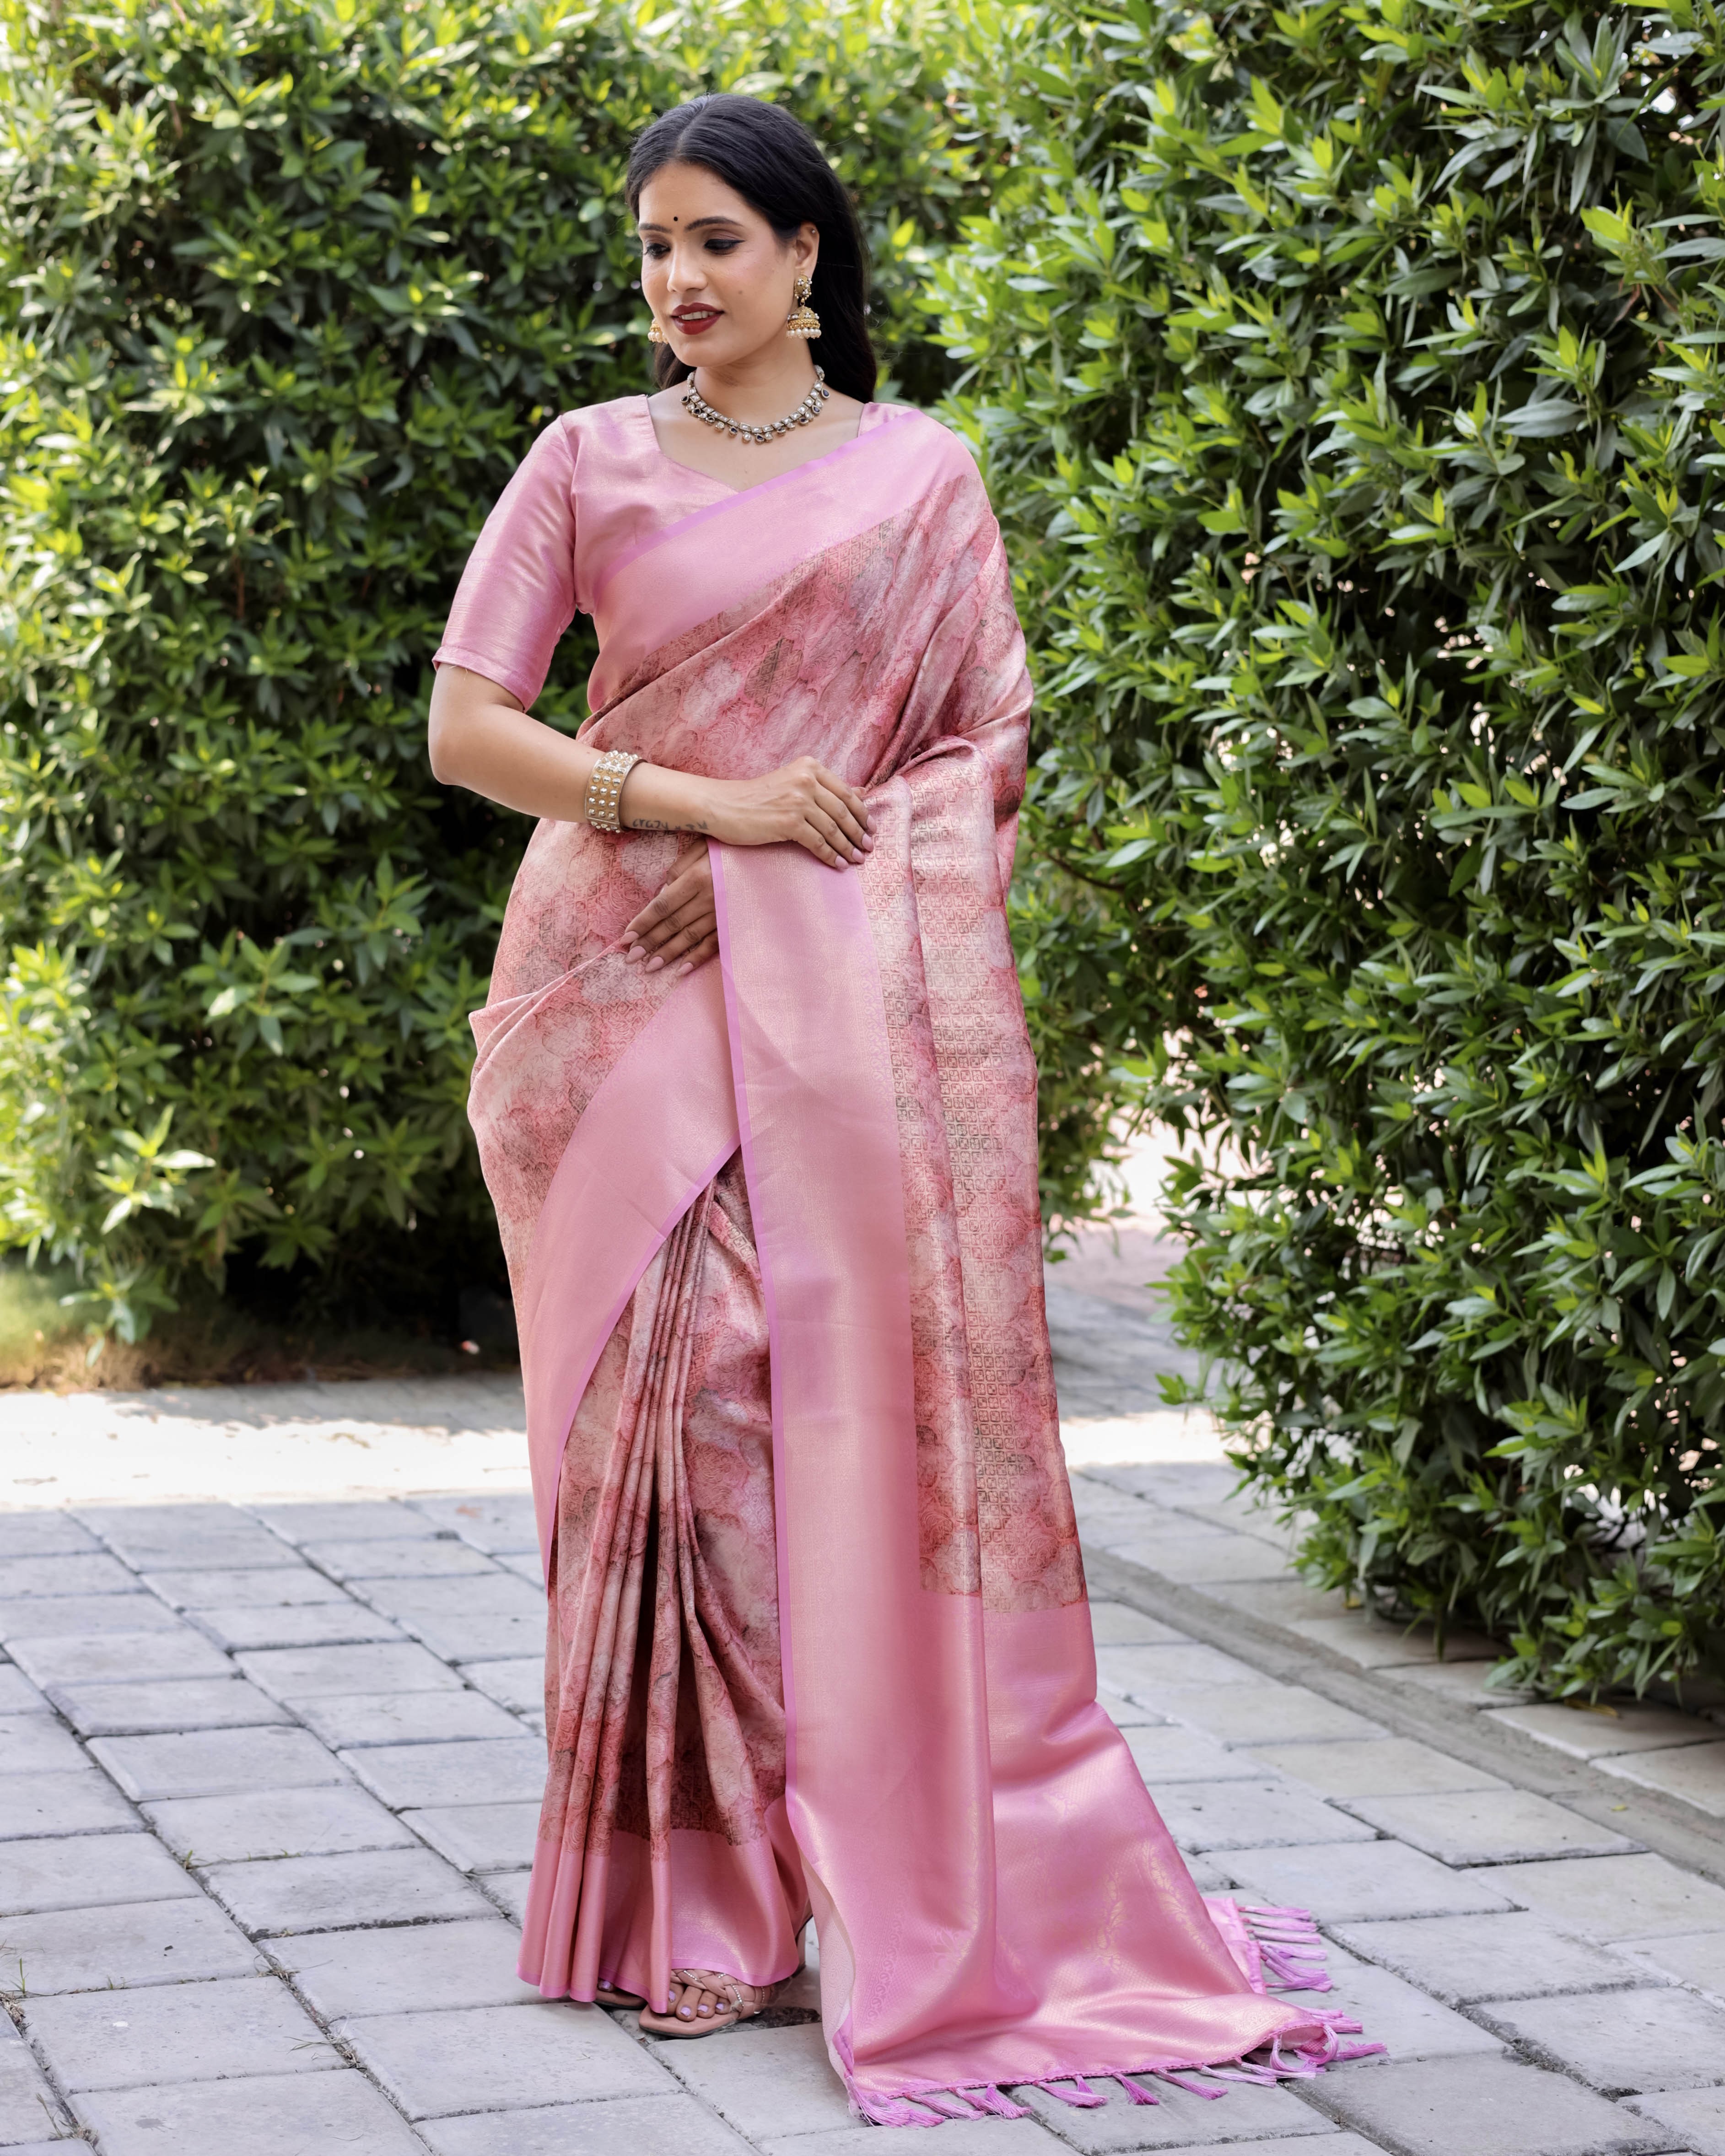 20 South Indian Style Designer Blouse Designs for Sarees